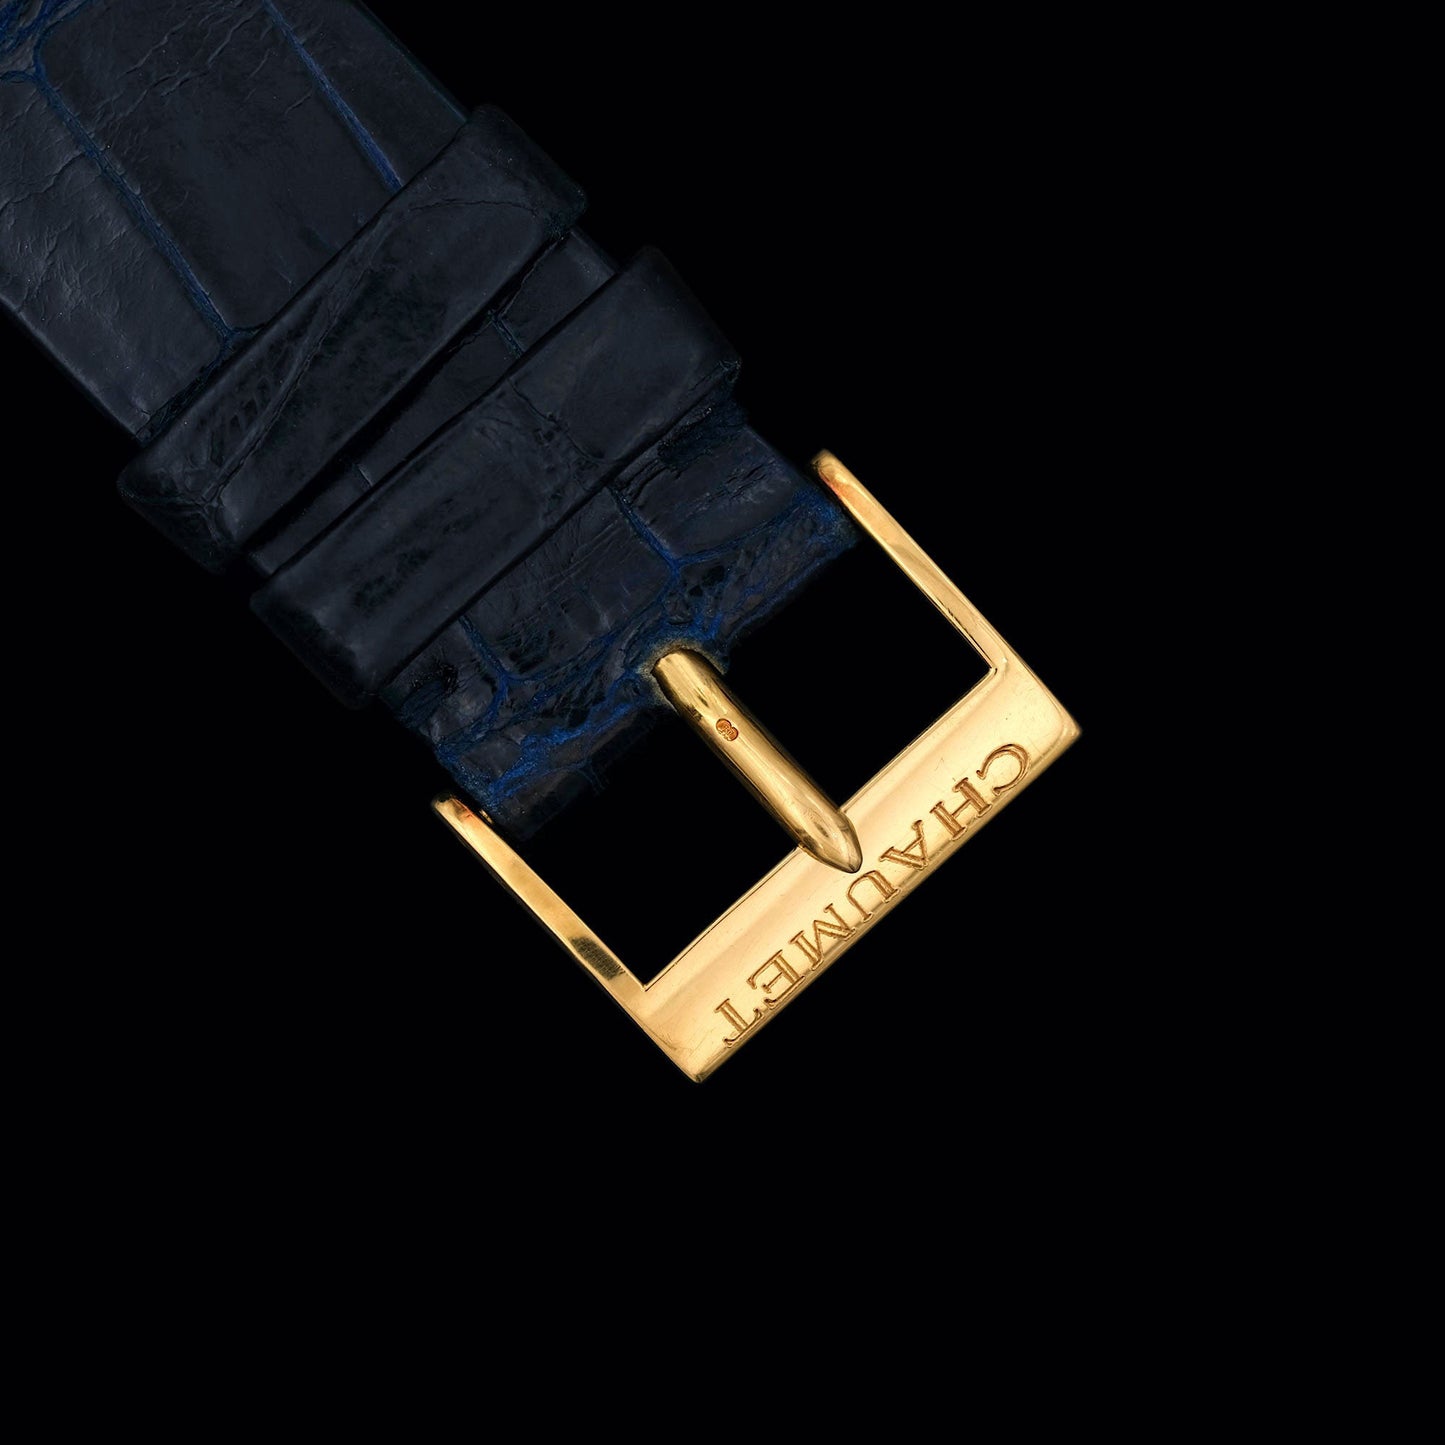 Chaumet Paris 18k Jump Hour ref.10A from 1990